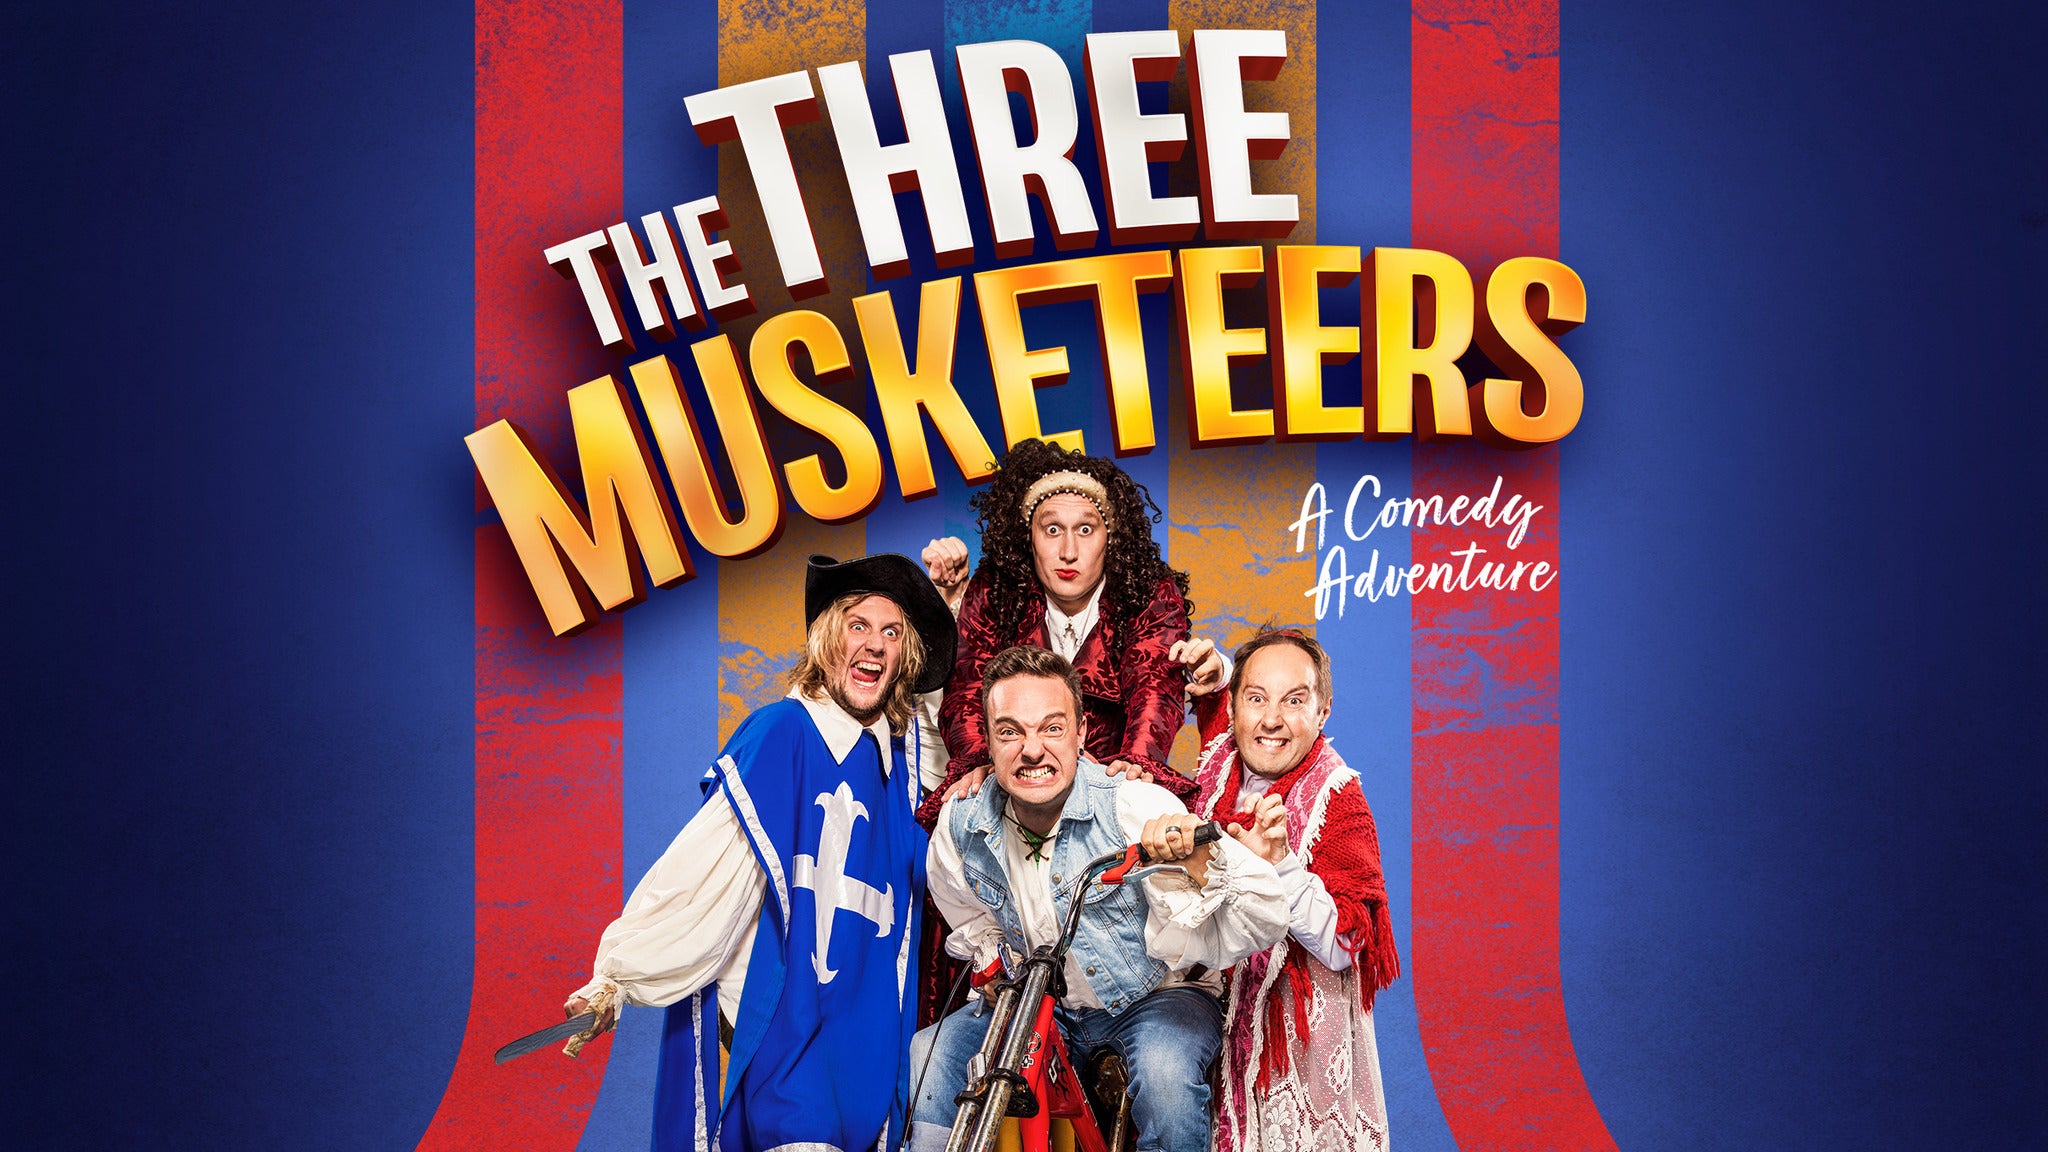 The Three Musketeers - a Comedy Adventure Event Title Pic